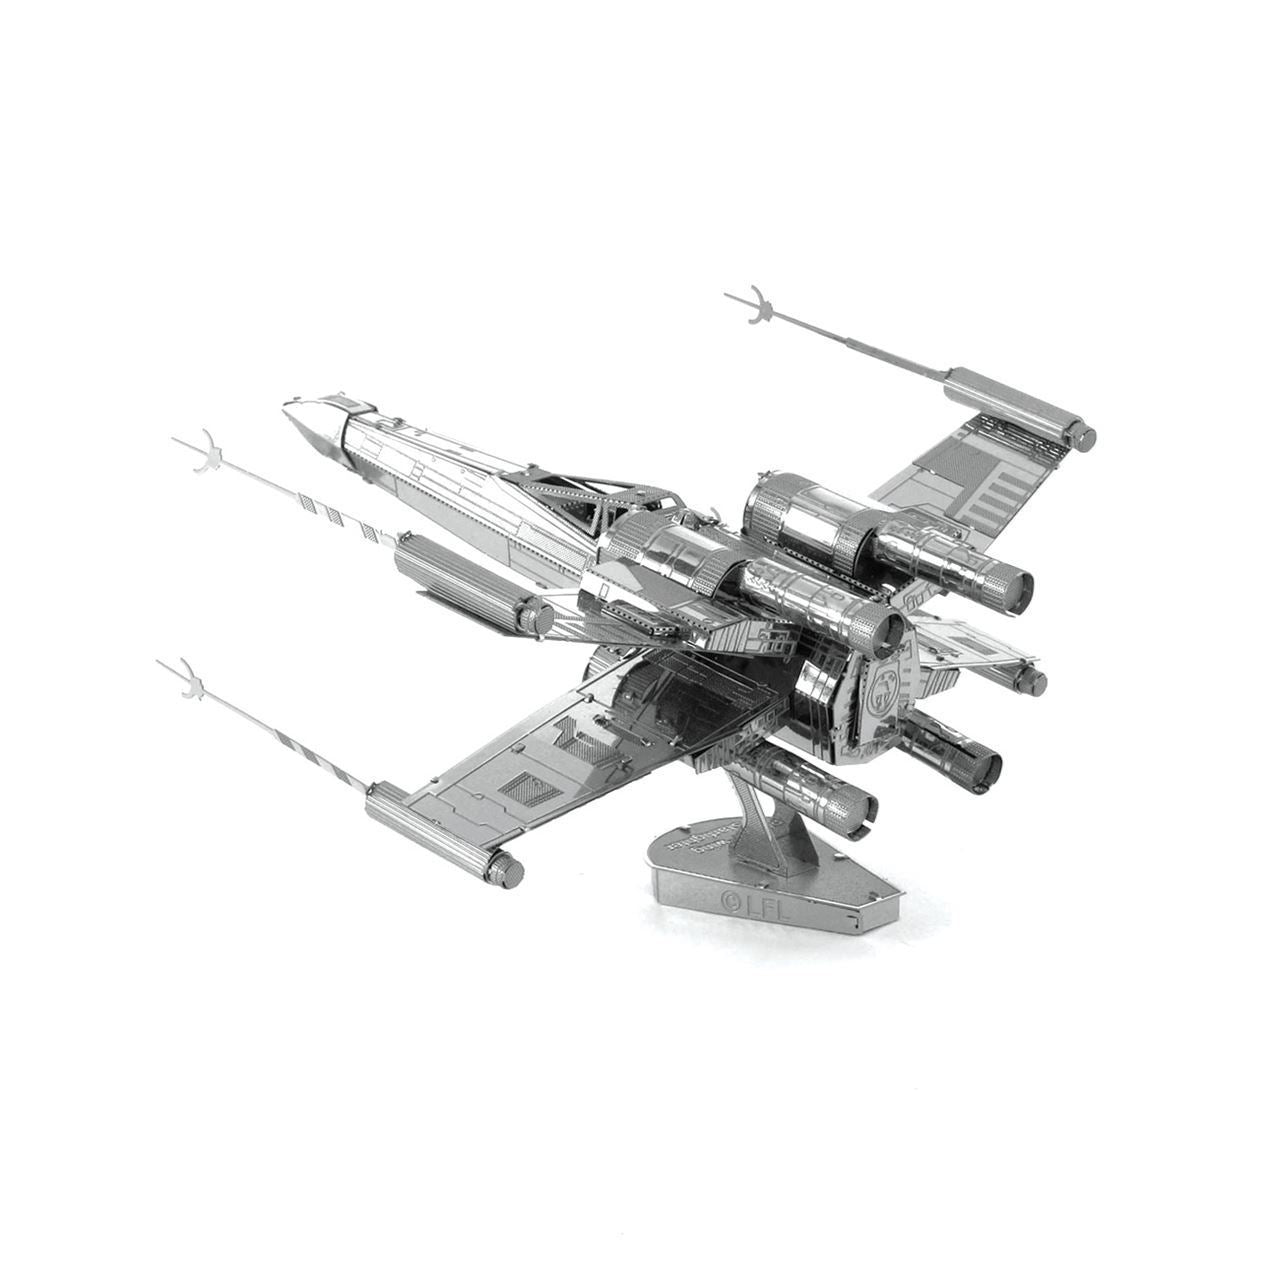 X-WING STAR FIGHTER™ - Steel 3D Model Kit gift puzzle puzzle